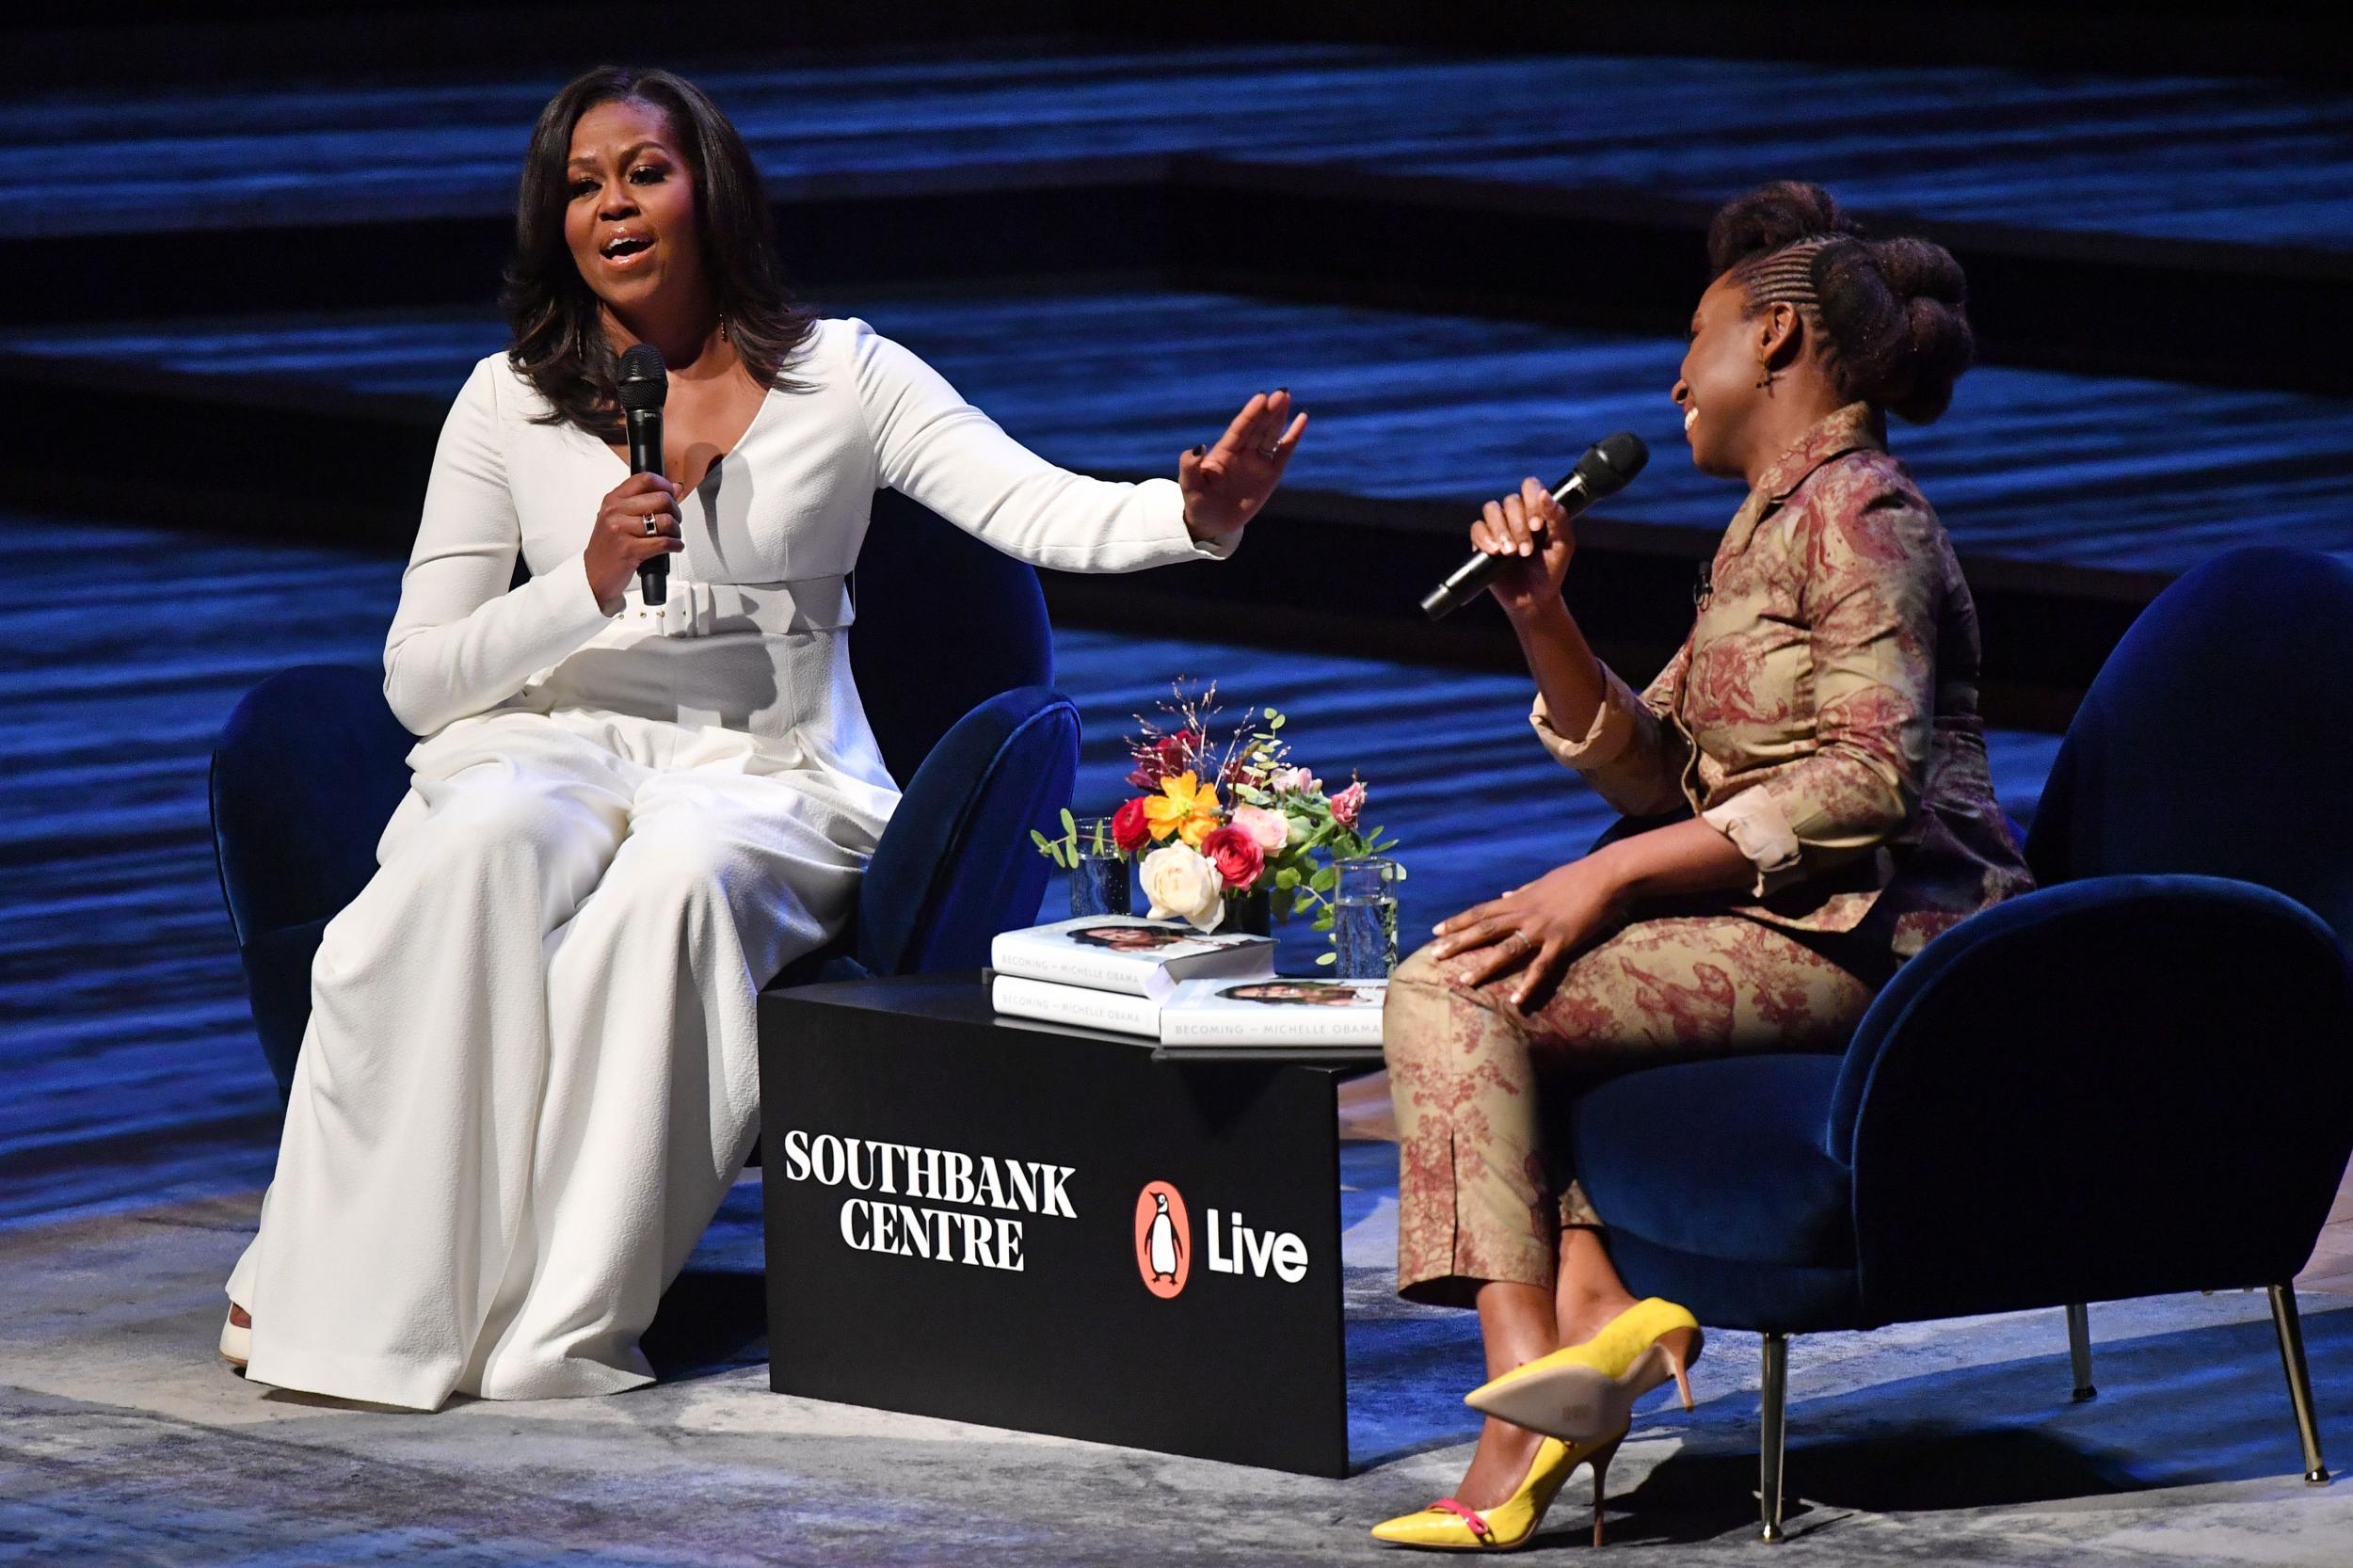 Former US first lady Michelle Obama (L) speaks with Nigerian novelist Chimamanda Ngozi Adichie (R) at the Royal Festival Hall in London on December 3, 2018